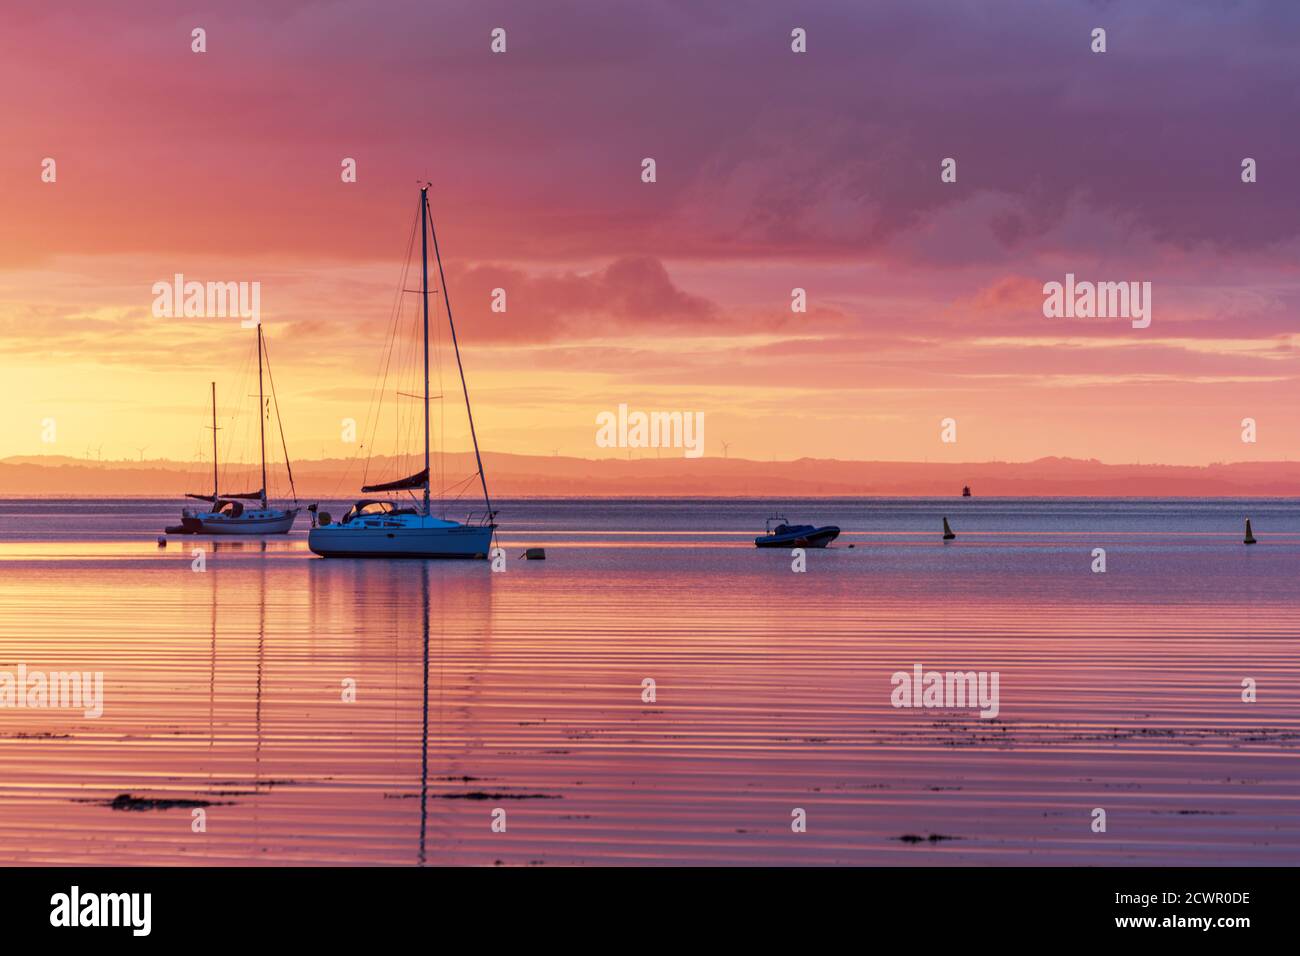 Lamlash Bay at sunrise, Isle of Arran, in the Firth of Clyde, Scotland, Uk Stock Photo